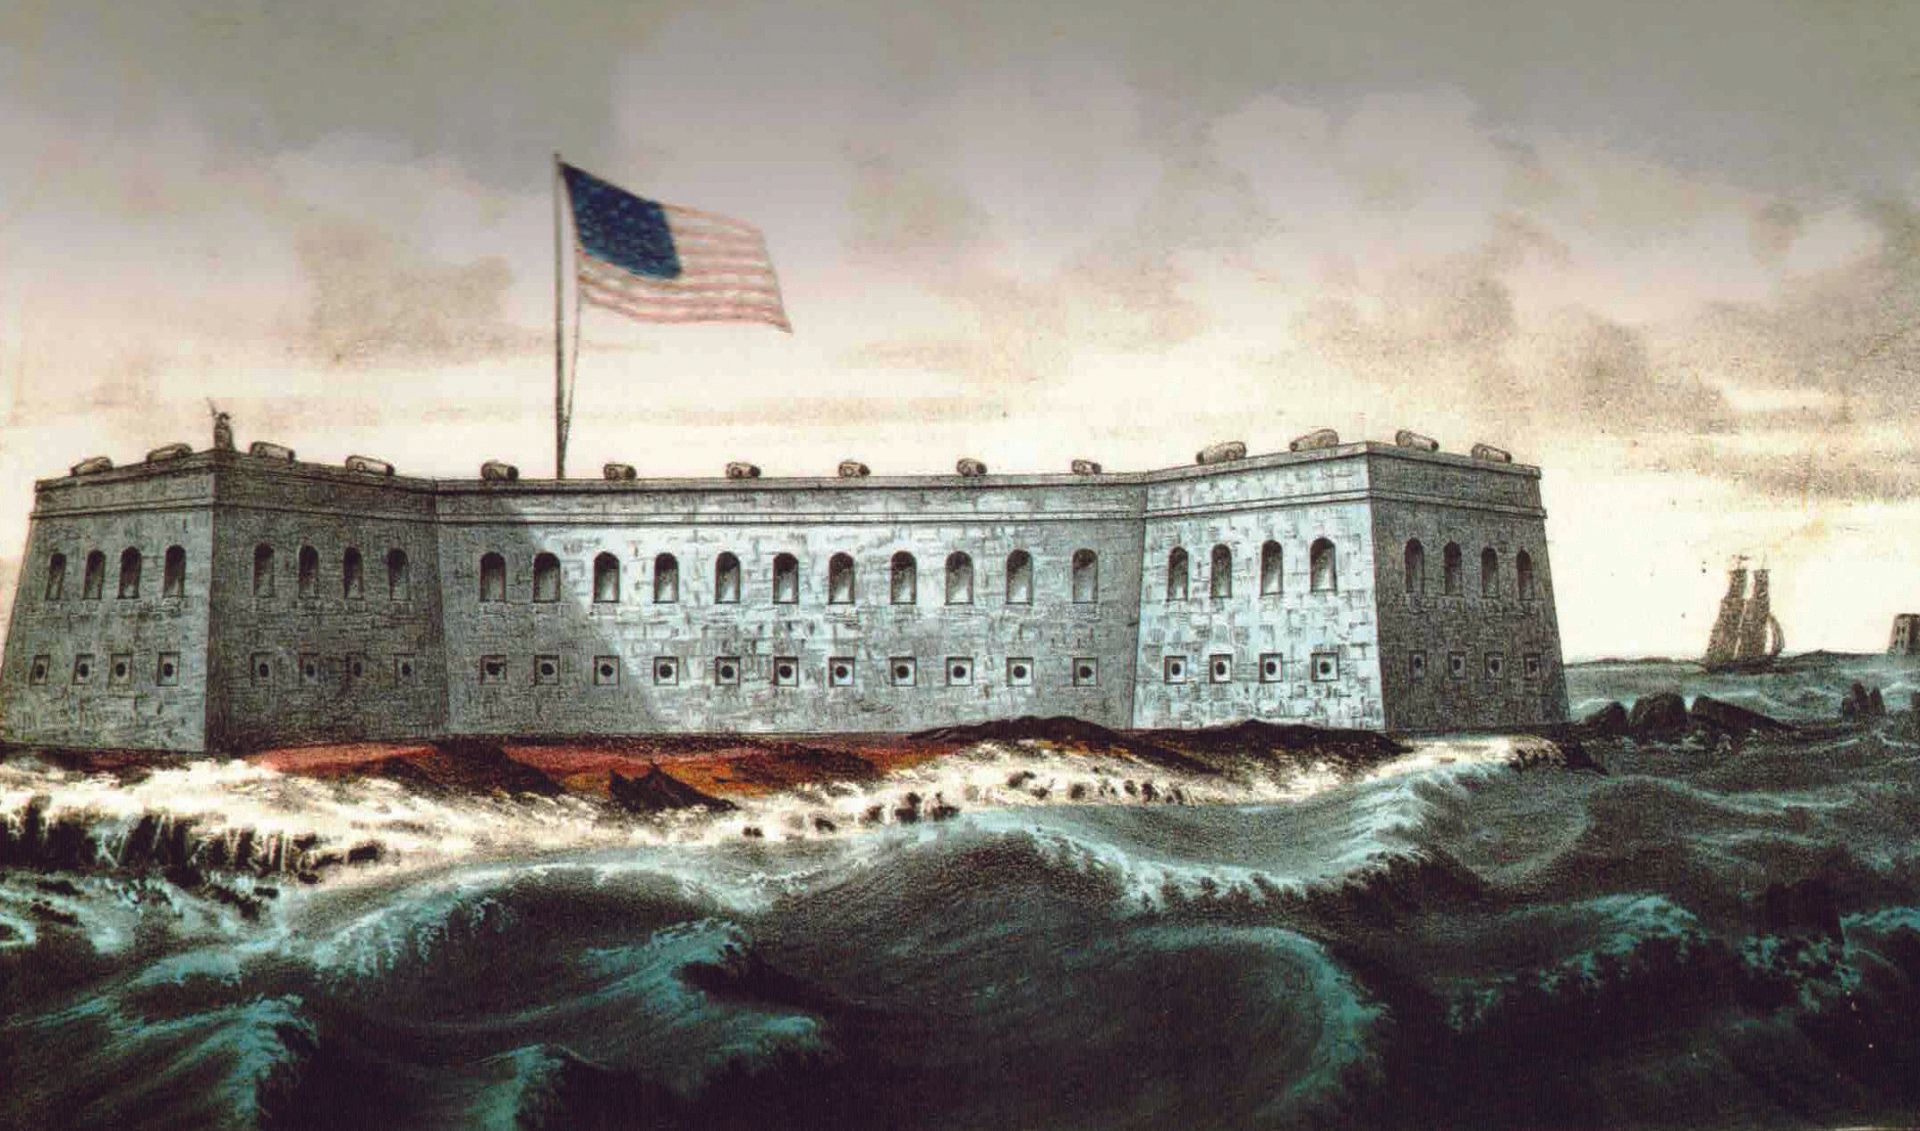 An artist's renditionof Fort Sumter, 1861  (Library of Congress)